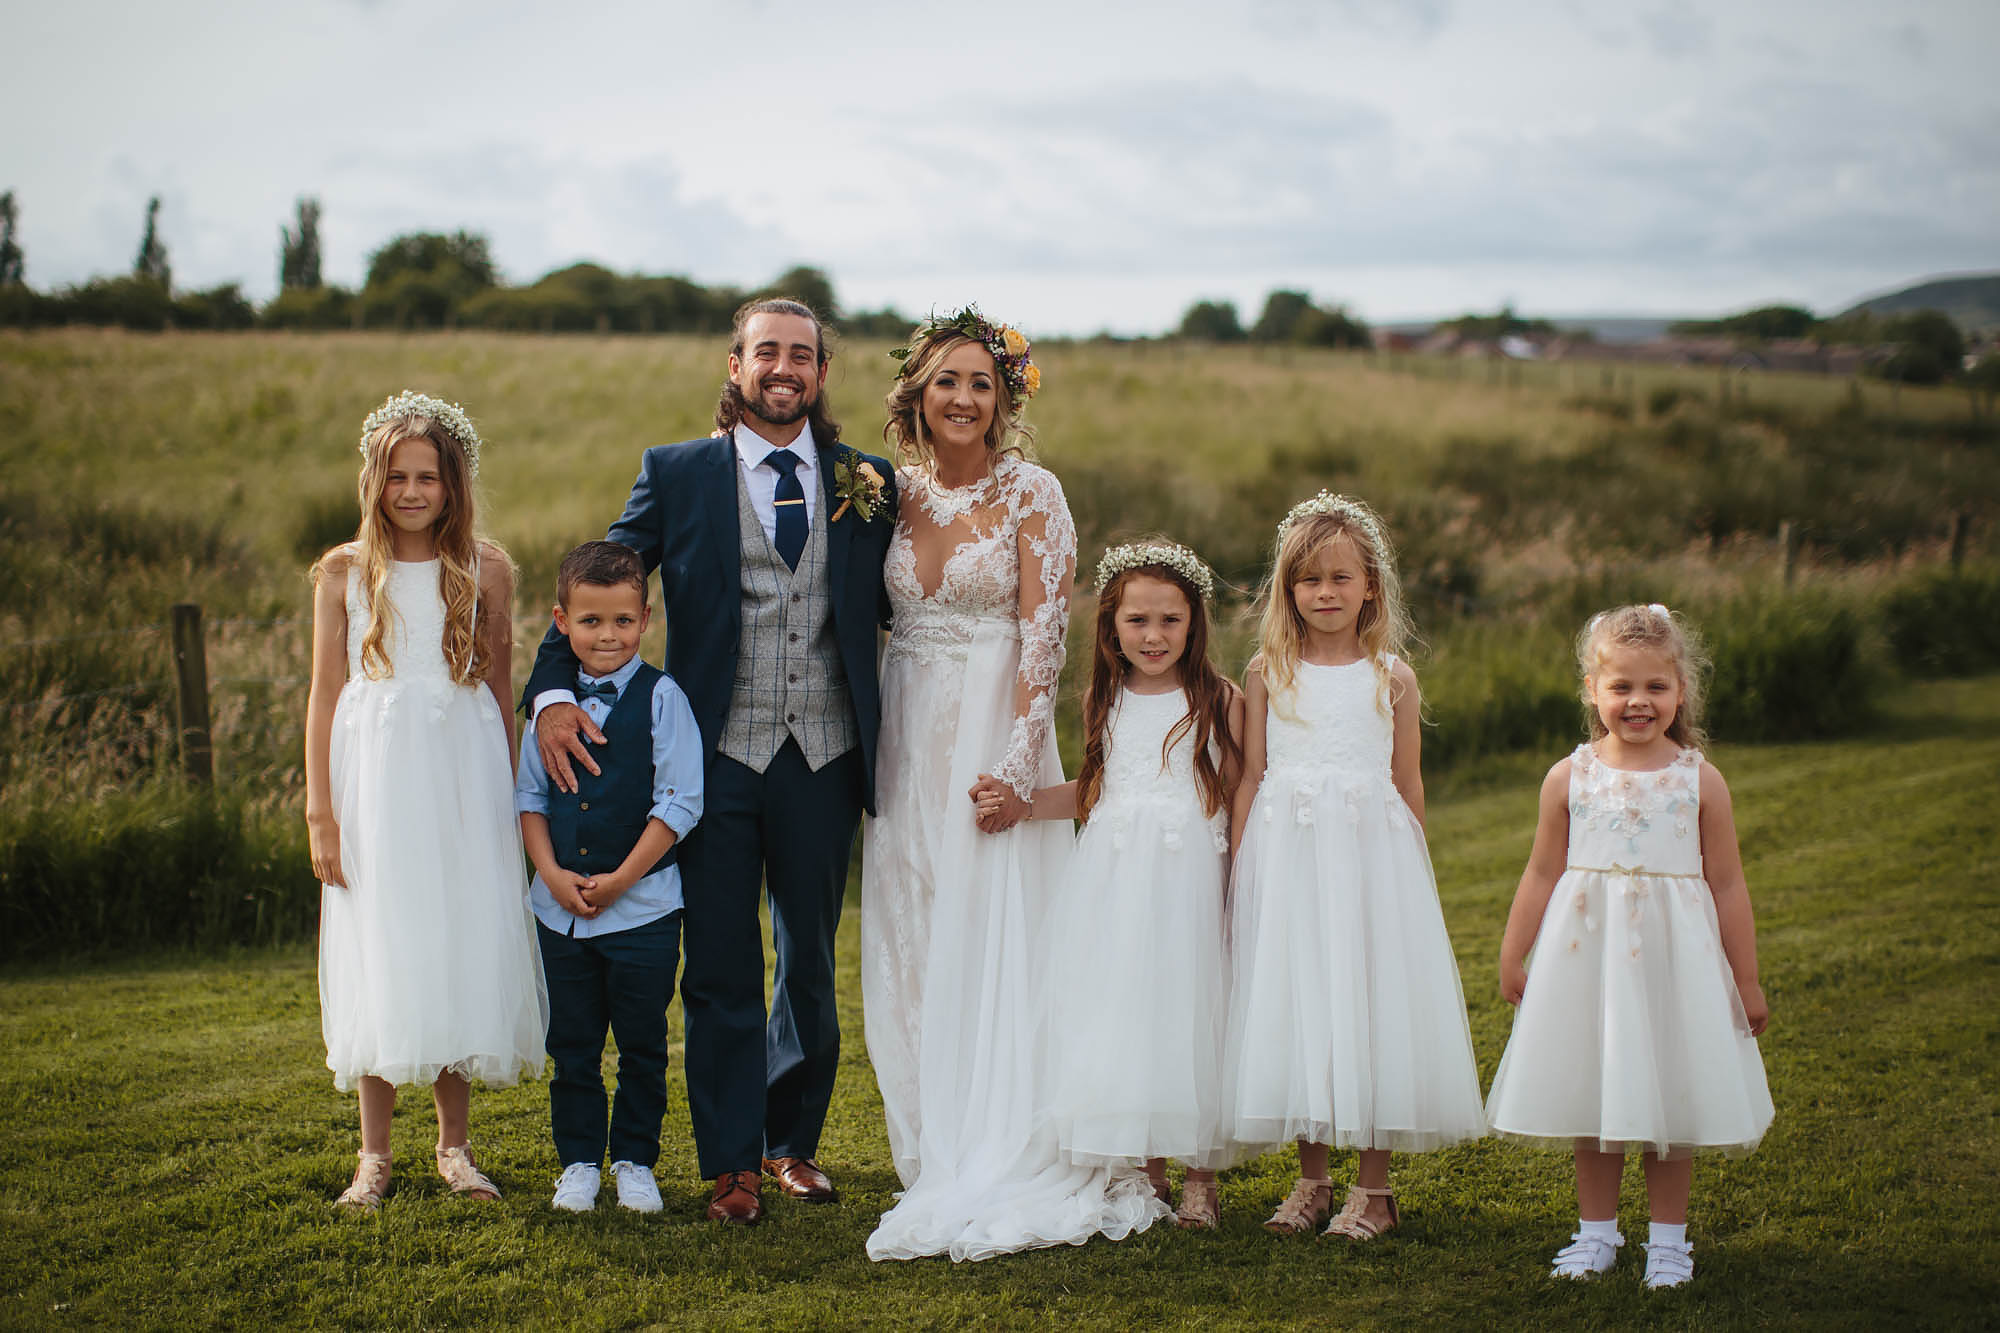 Bride groom and bridesmaids pose for a photo at a wedding